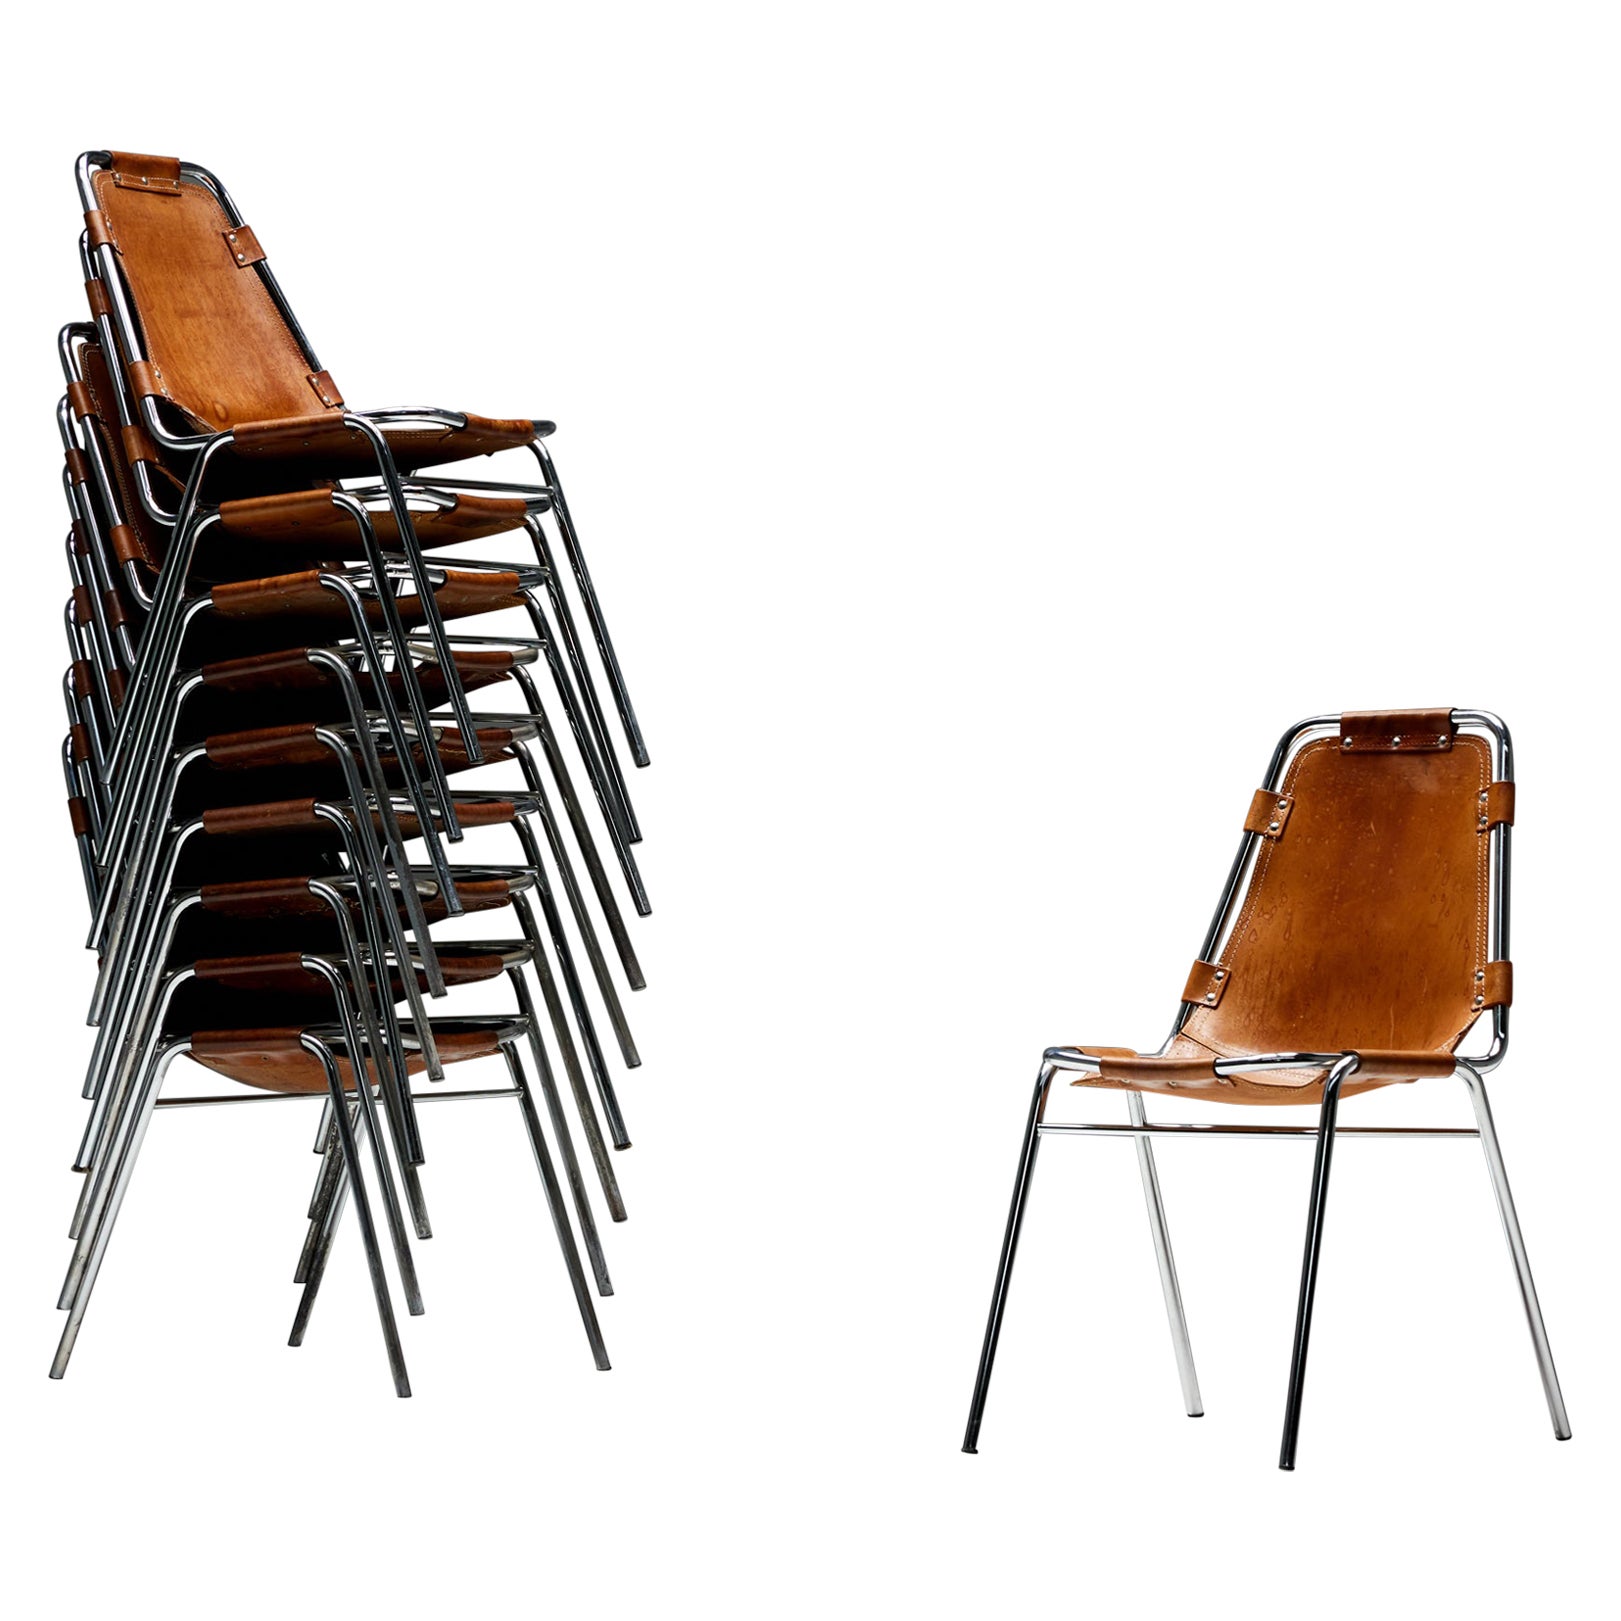 Dal Vera 'Les Arcs' Chairs Selected by Charlotte Perriand, France, 1970s